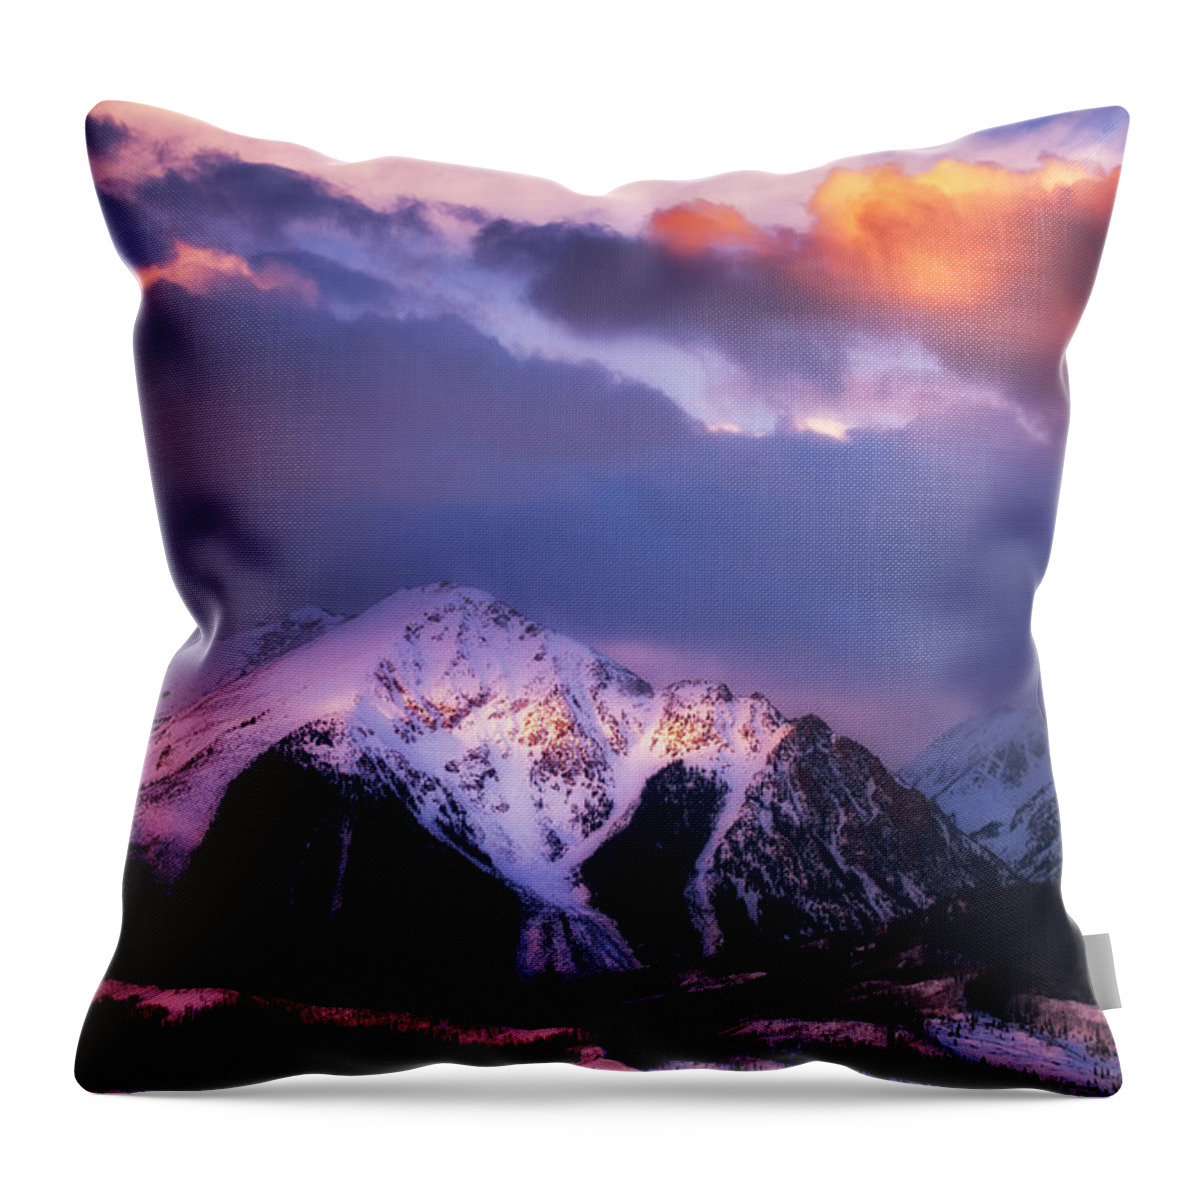 Storm Throw Pillow featuring the photograph Morning Storm by Darren White